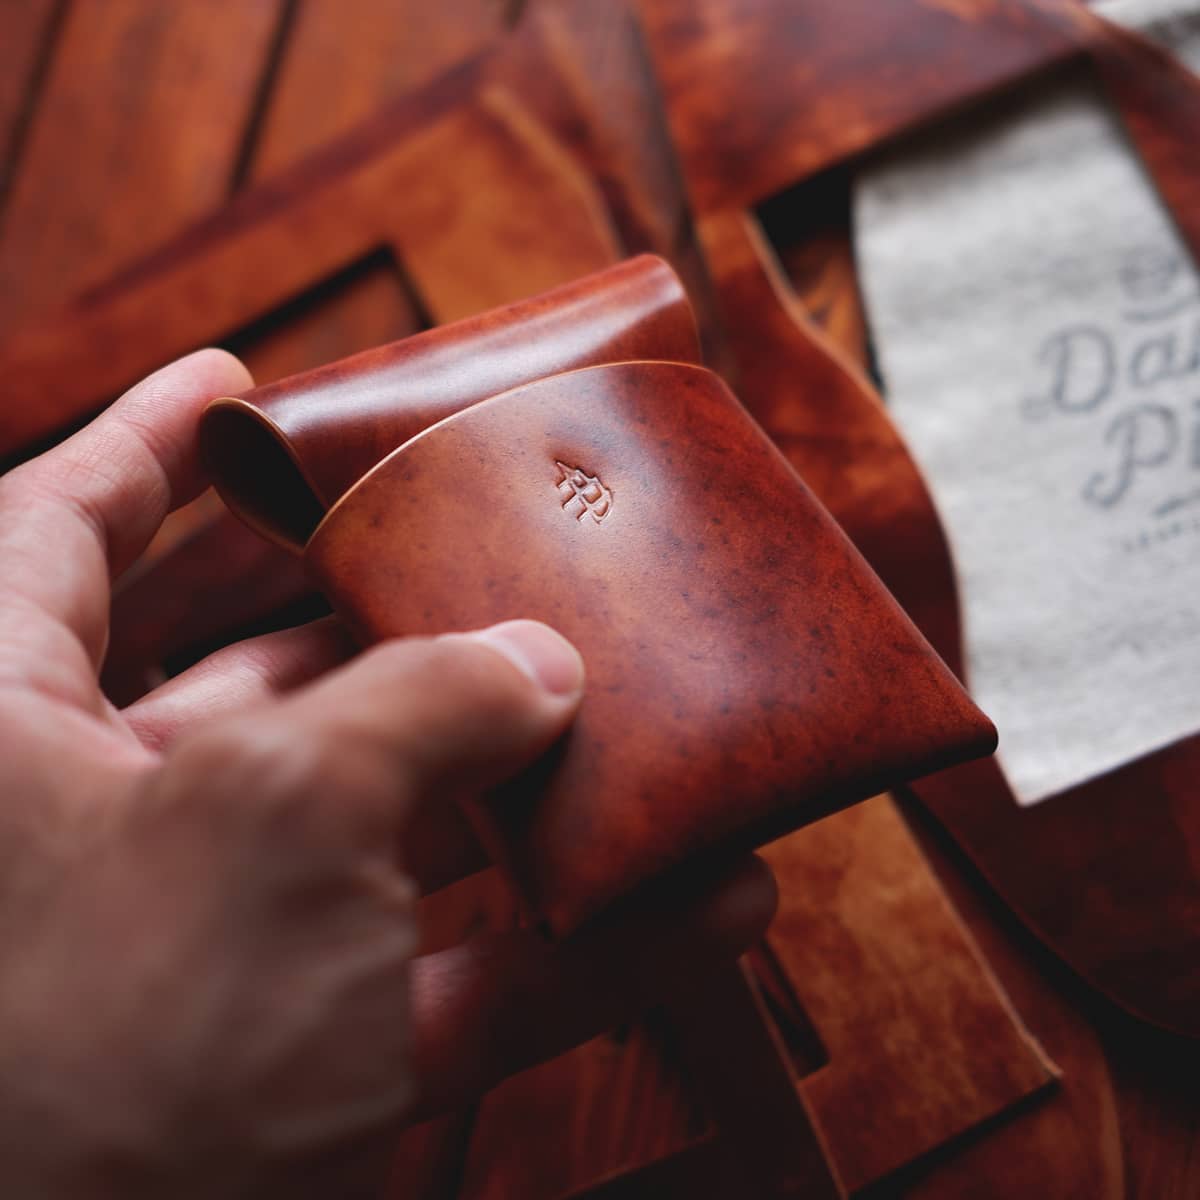 The Lodgepole Stitchless Wallet in Cognac Marbled Shell Cordovan leather held in hand